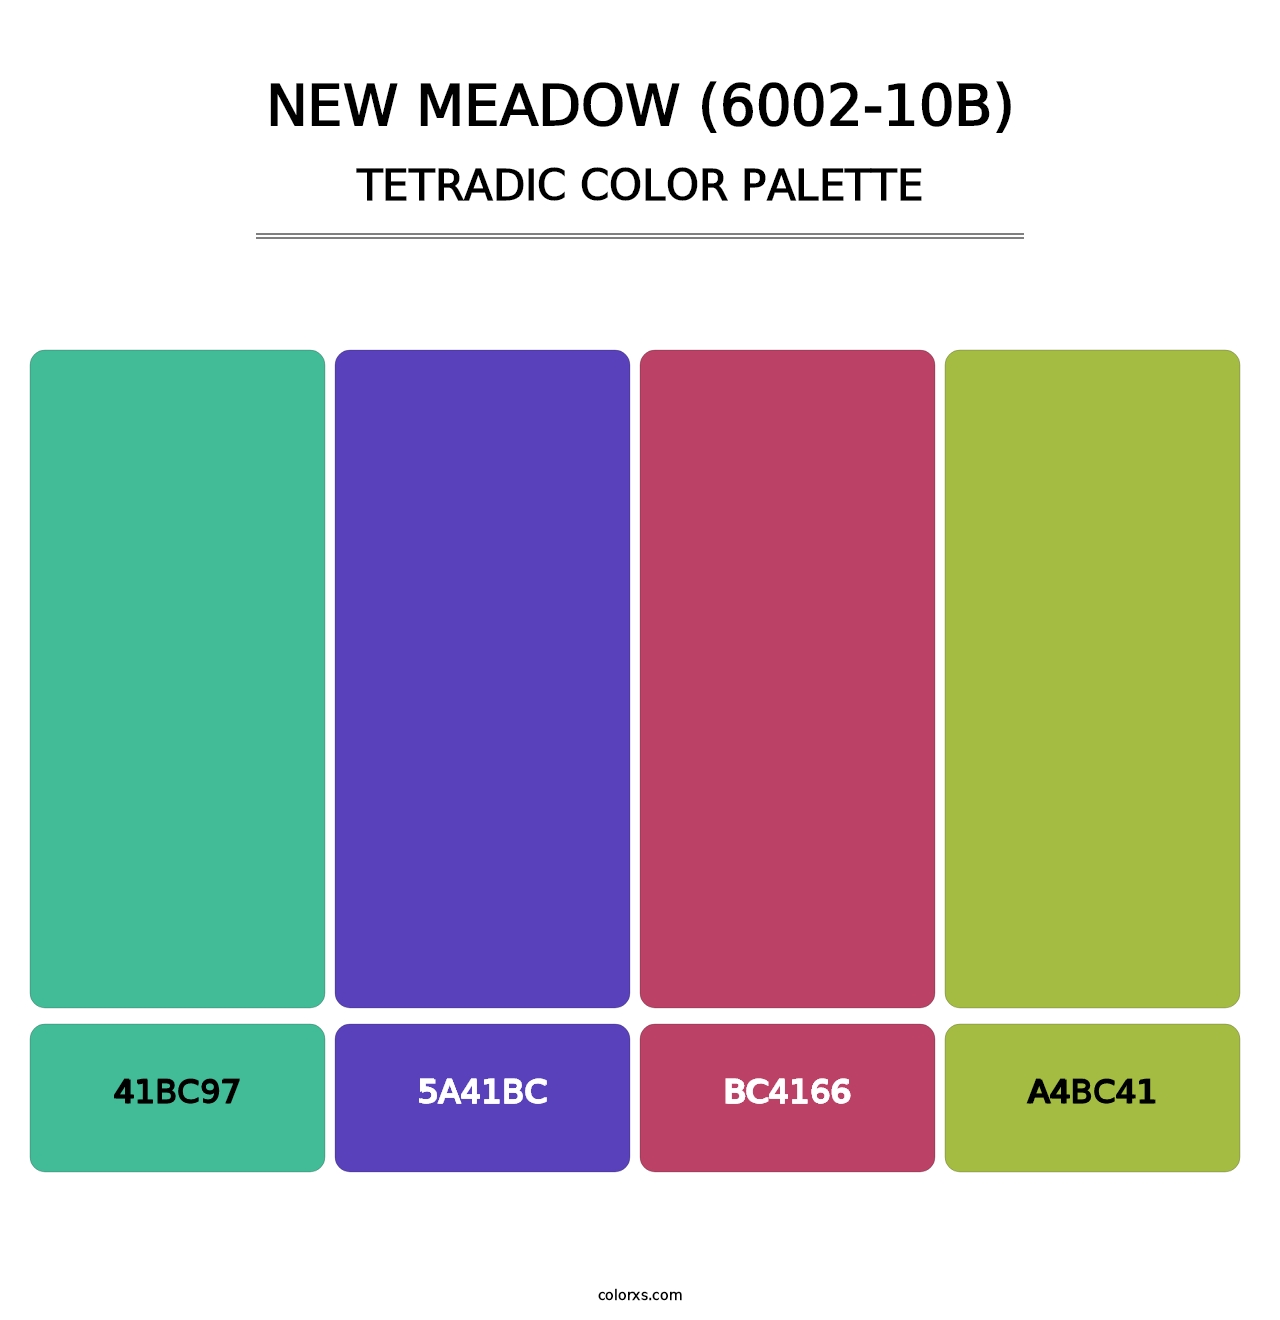 New Meadow (6002-10B) - Tetradic Color Palette